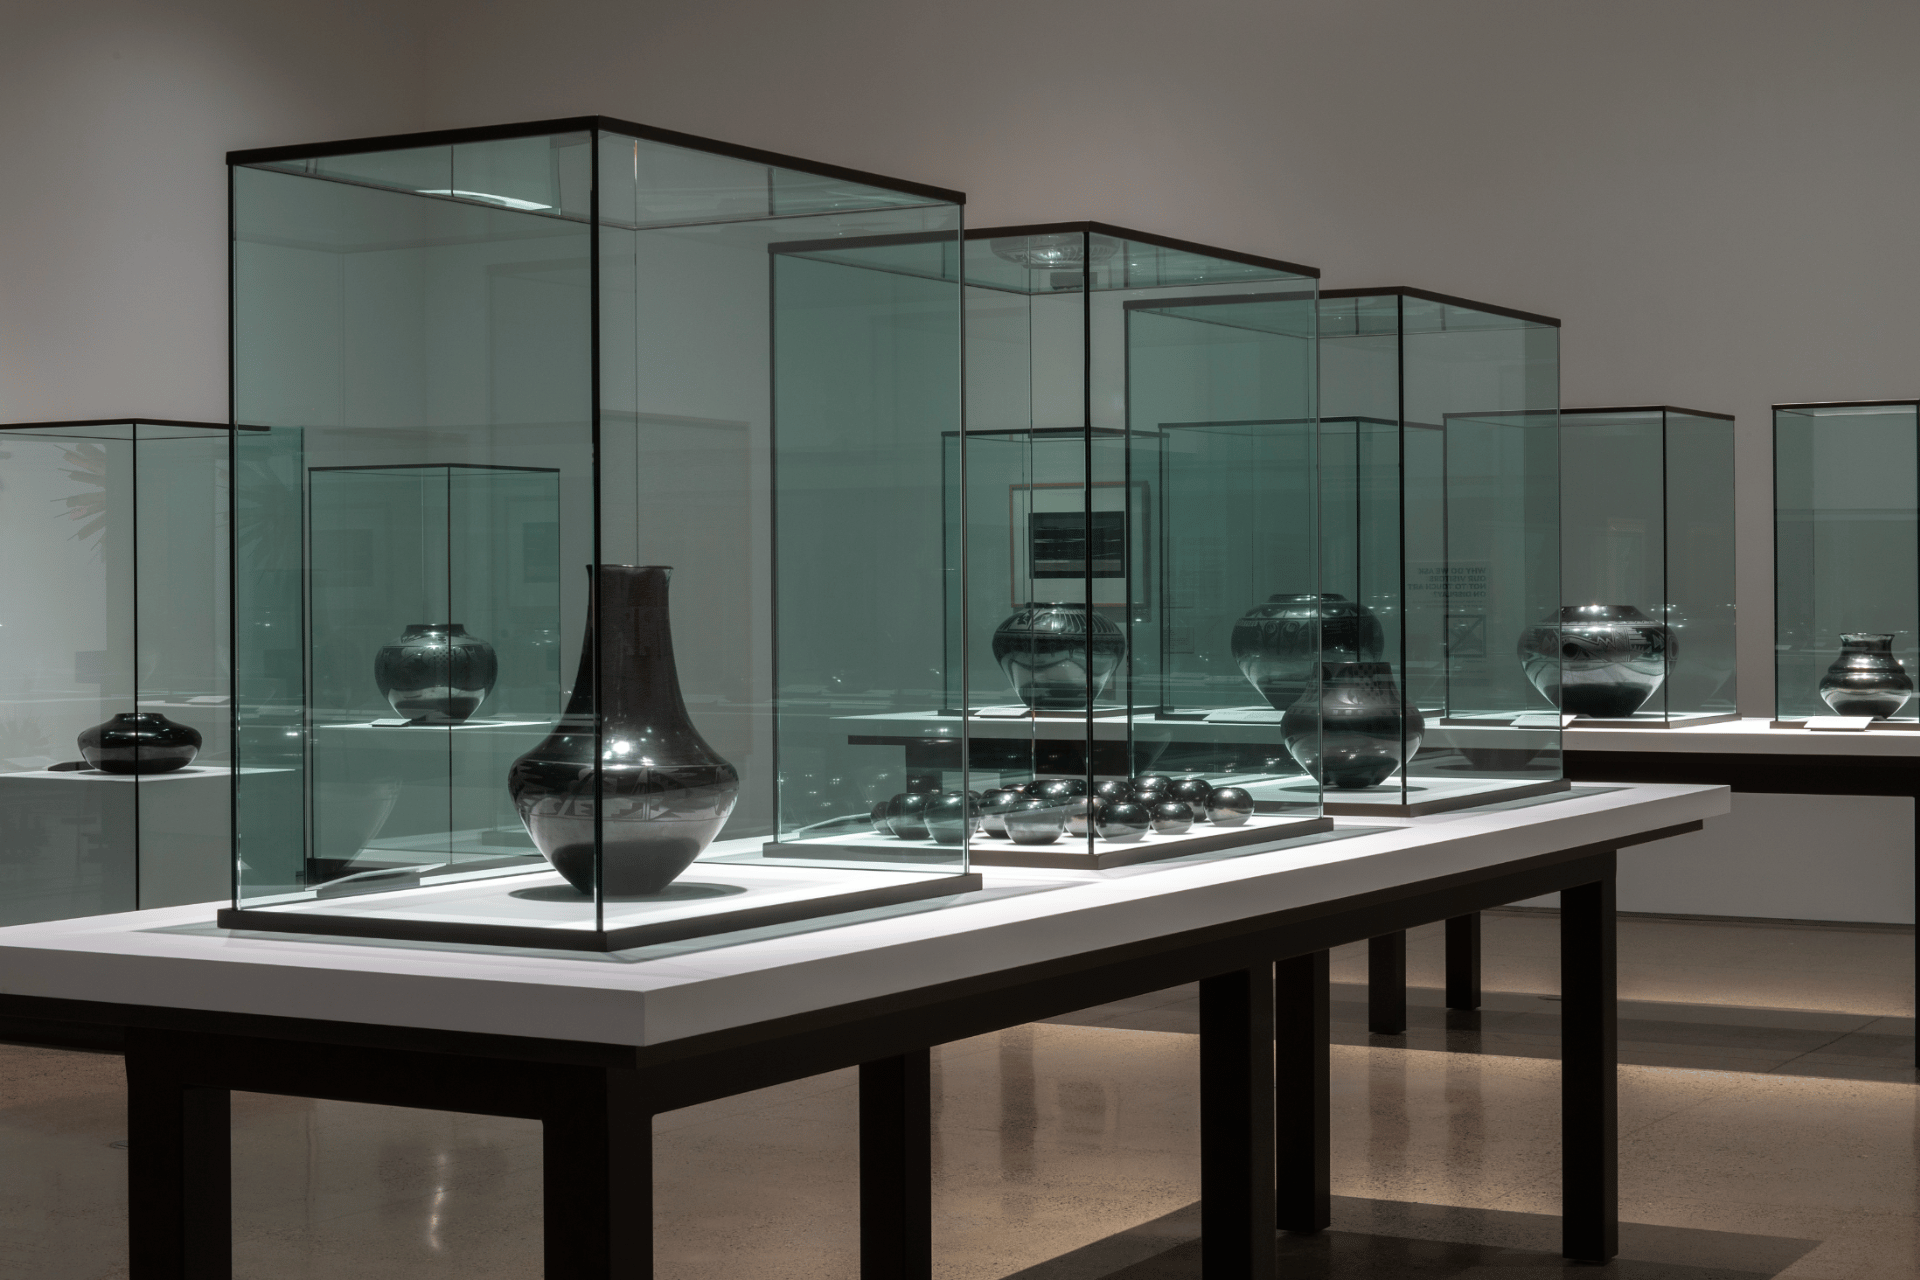 A museum exhibit displaying various black ceramic vases and bowls in glass cases, set on white platforms with a minimalist background.